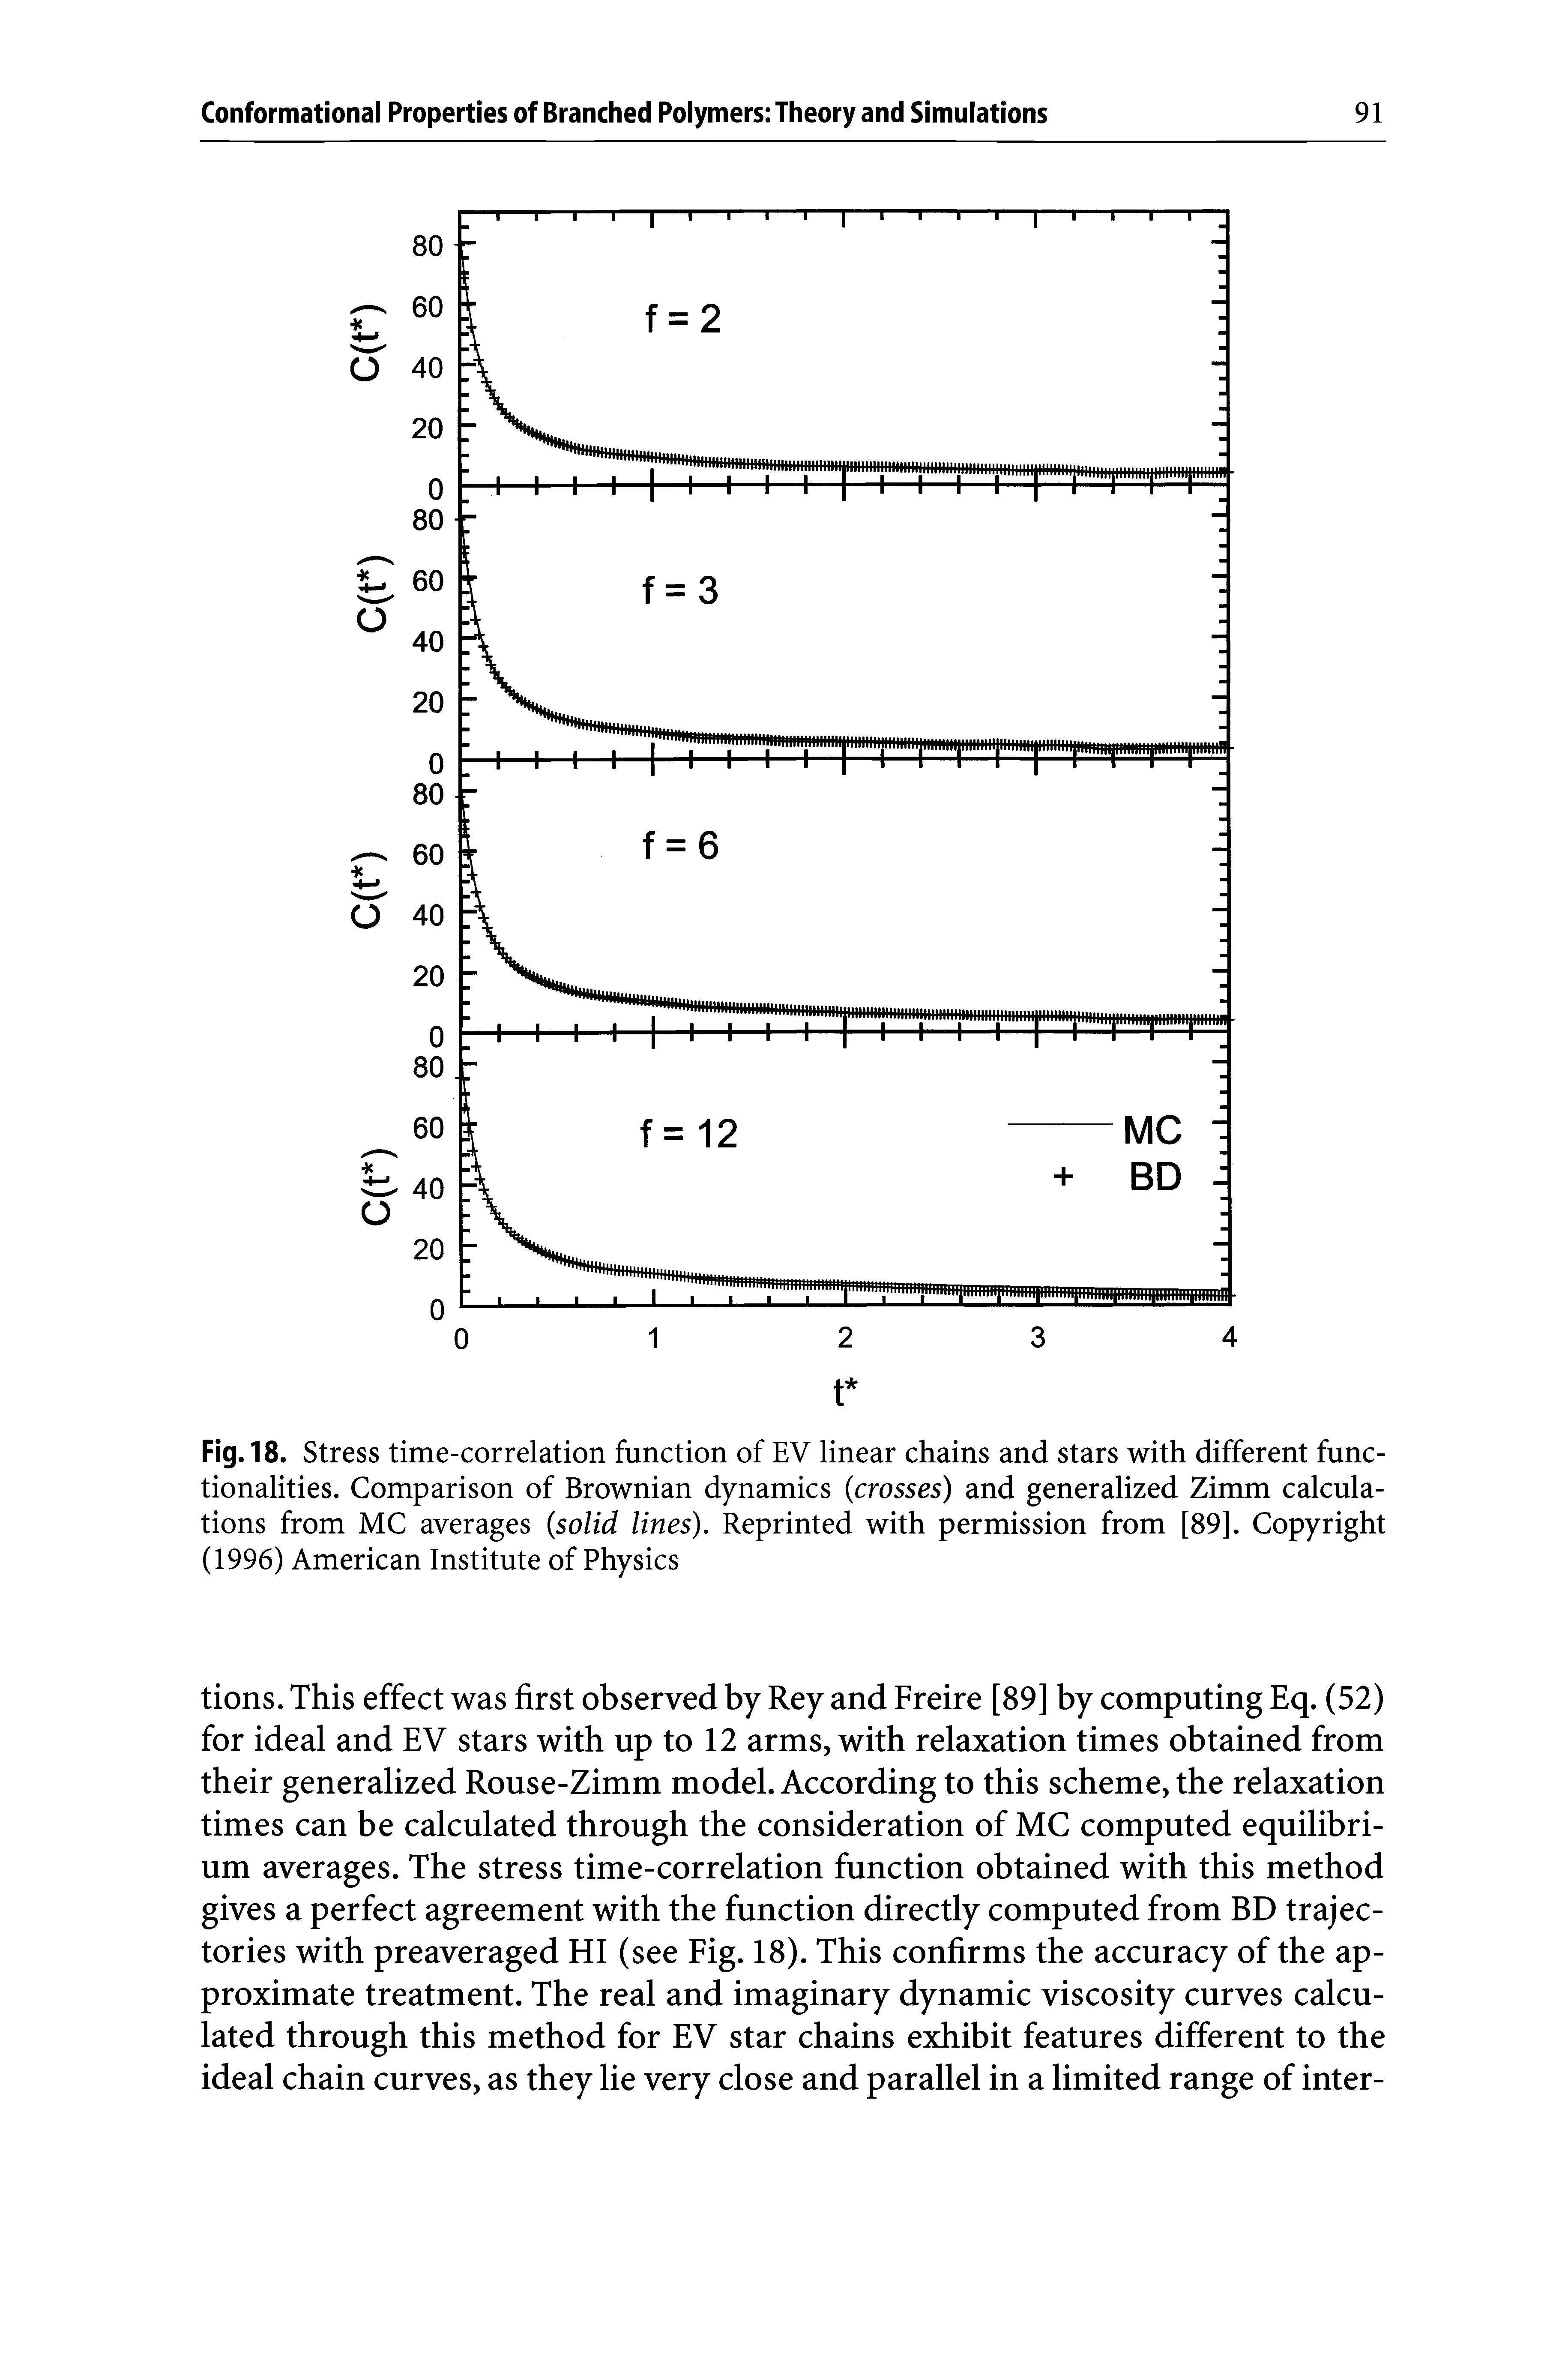 Fig. 18. Stress time-correlation function of EV linear chains and stars with different functionalities. Comparison of Brownian dynamics (crosses) and generalized Zimm calculations from MC averages (solid lines). Reprinted with permission from [89]. Copyright (1996) American Institute of Physics...